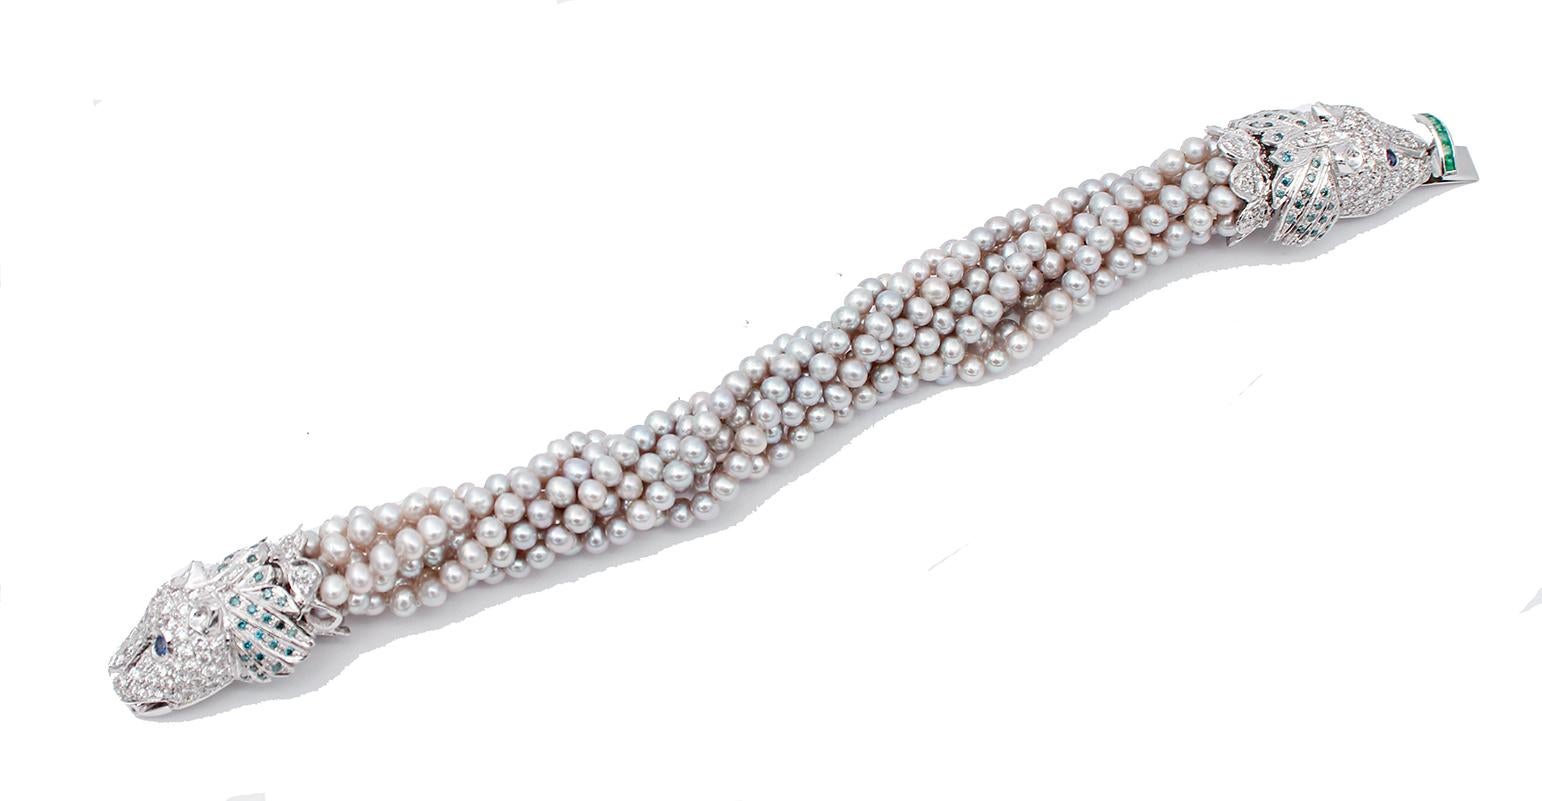 SHIPPING POLICY: 
No additional costs will be added to this order. 
Shipping costs will be totally covered by the seller (customs duties included).

Particular bracelet in 14 karat white gold mounted with  an intertwining of strings of pearls and,